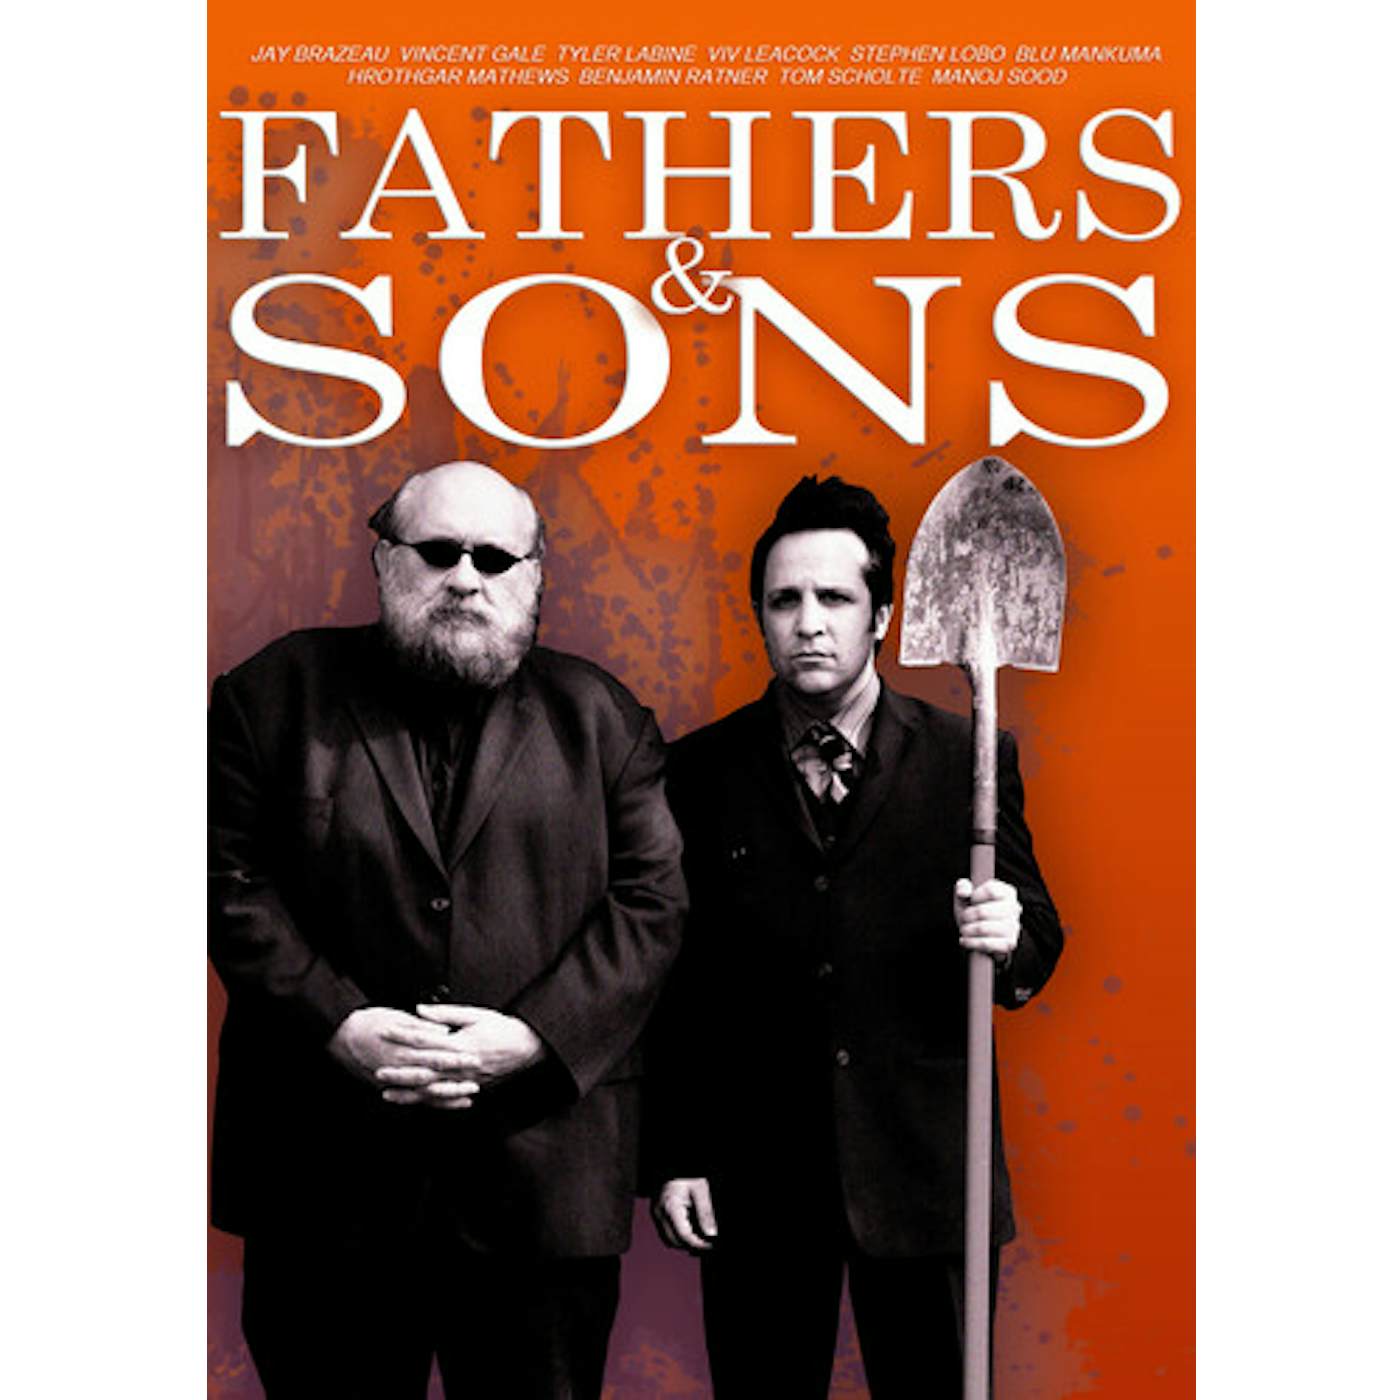 FATHERS & SONS DVD